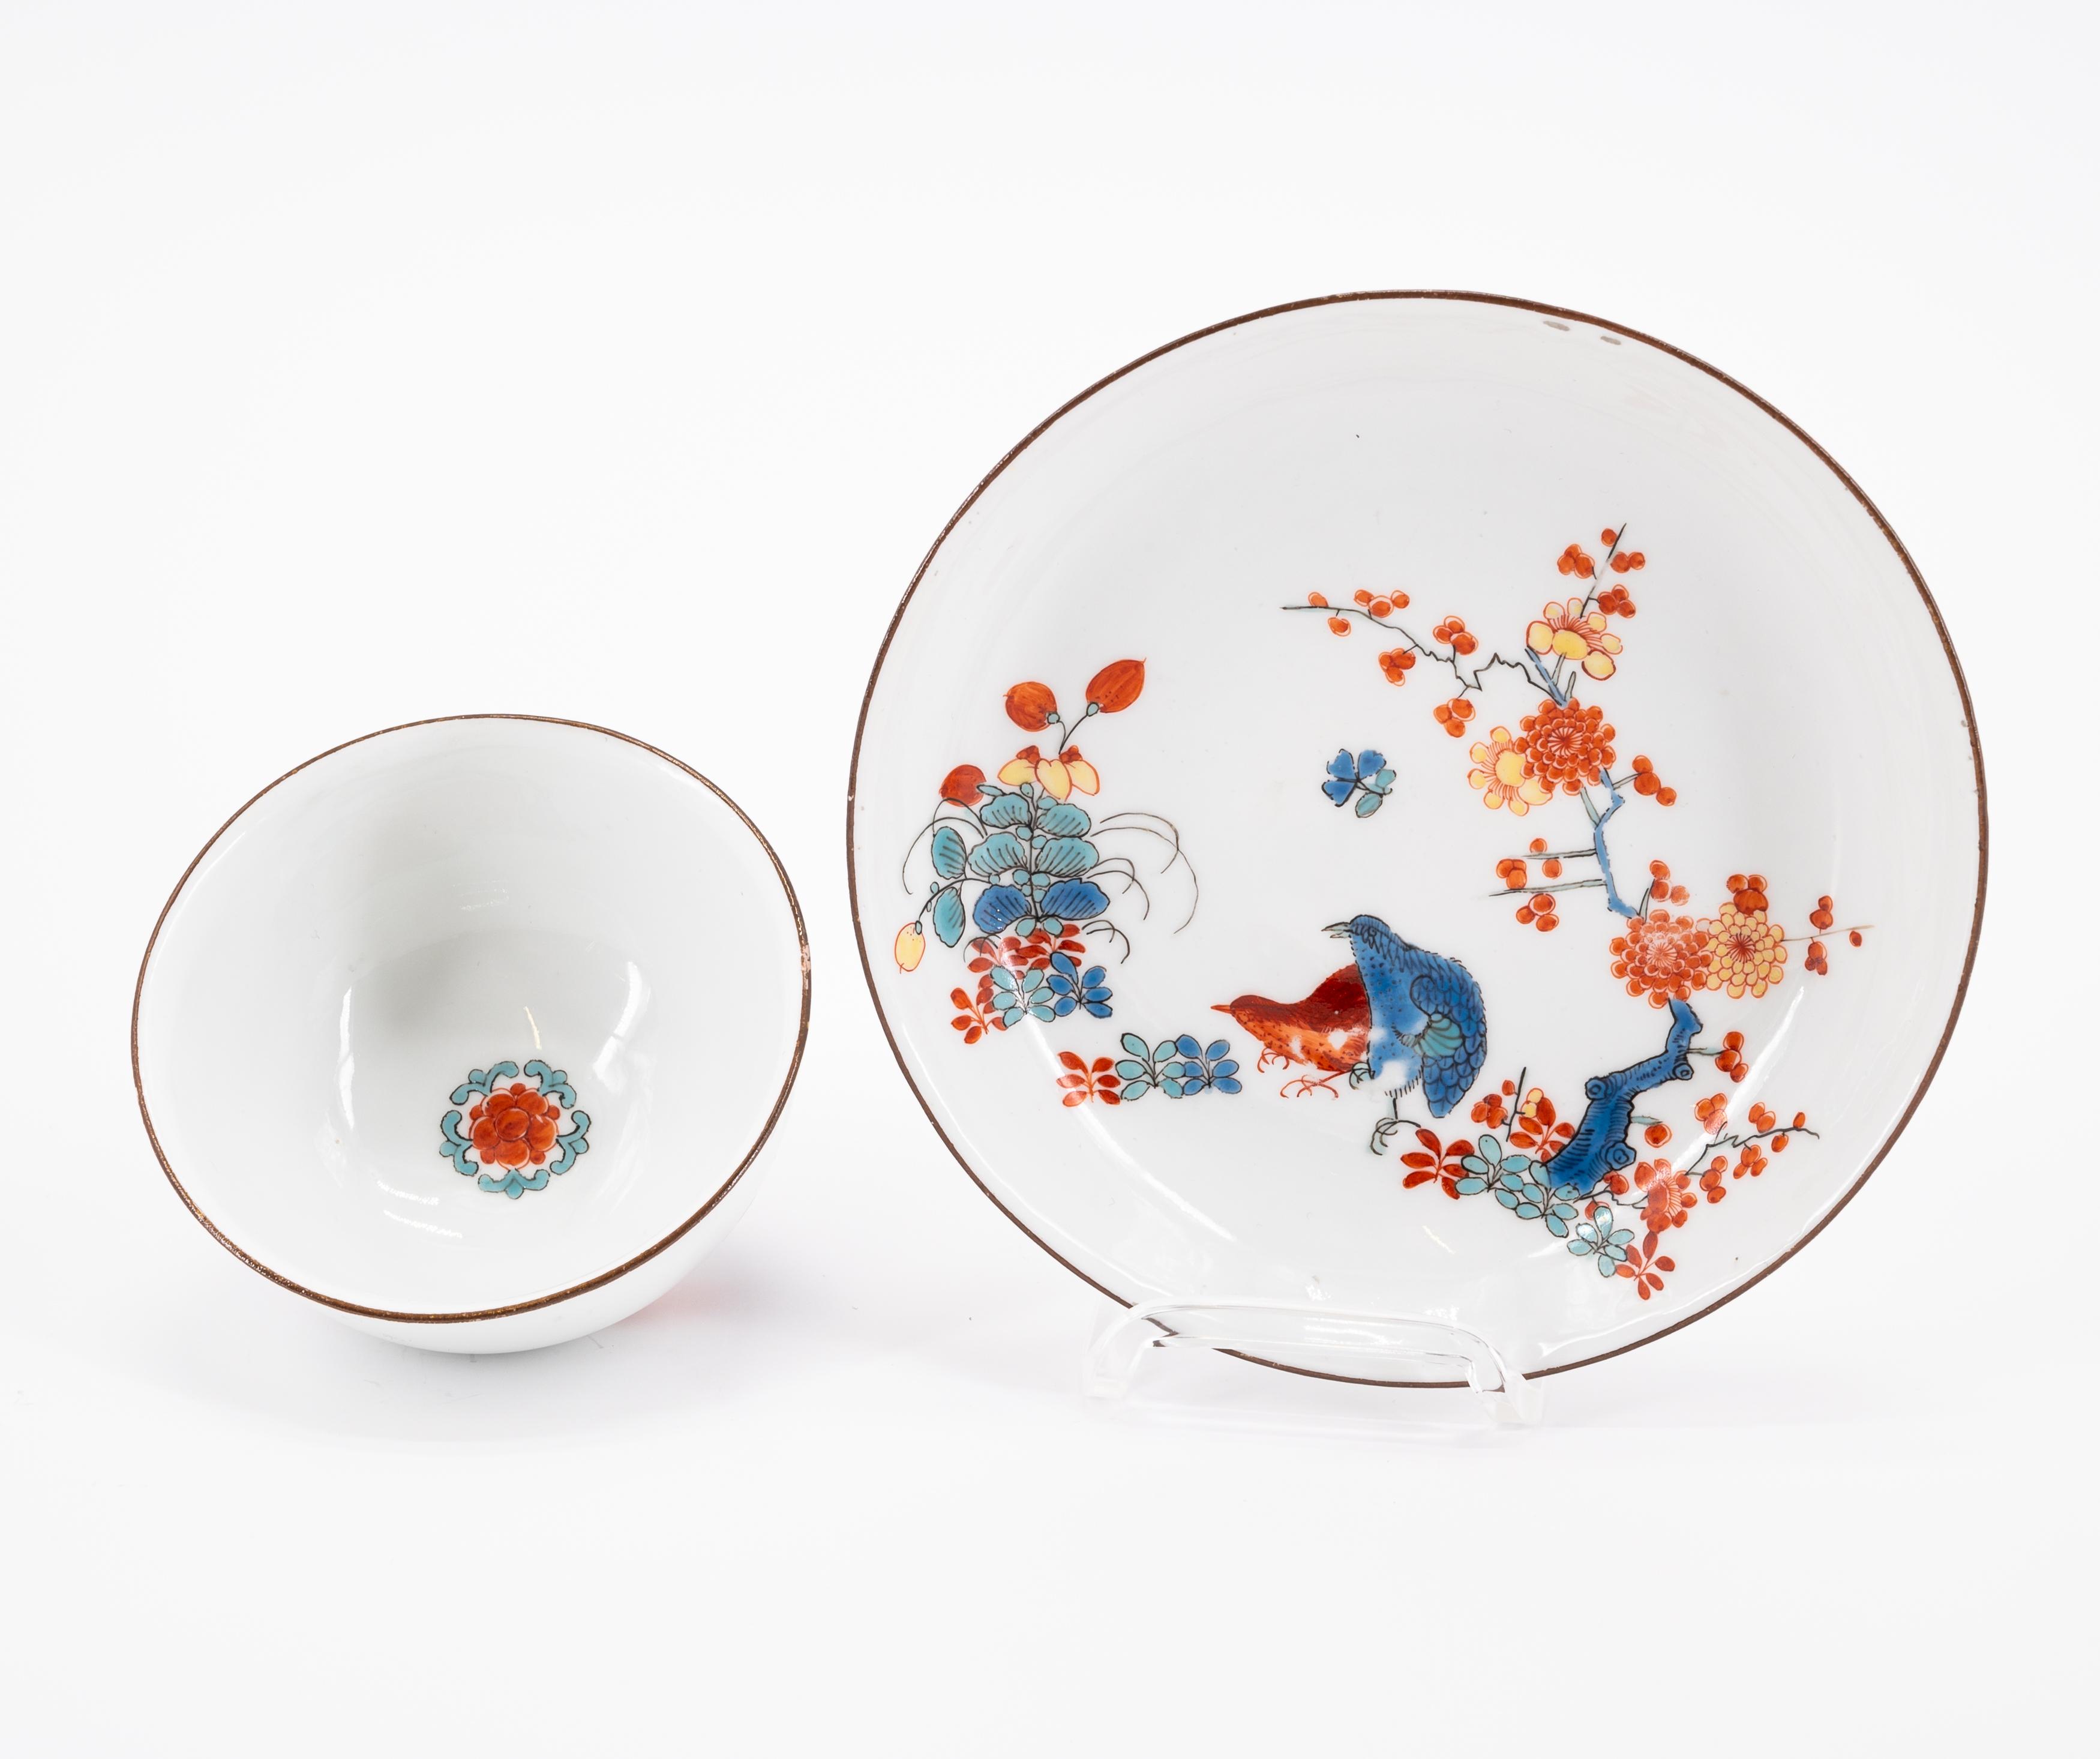 ONE PORCELAIN CUP AND SAUCER WITH QUAIL DECOR & TWO CUPS WITH PURPLE BACKGROUND AND BIRD DECOATIONS - Image 10 of 11